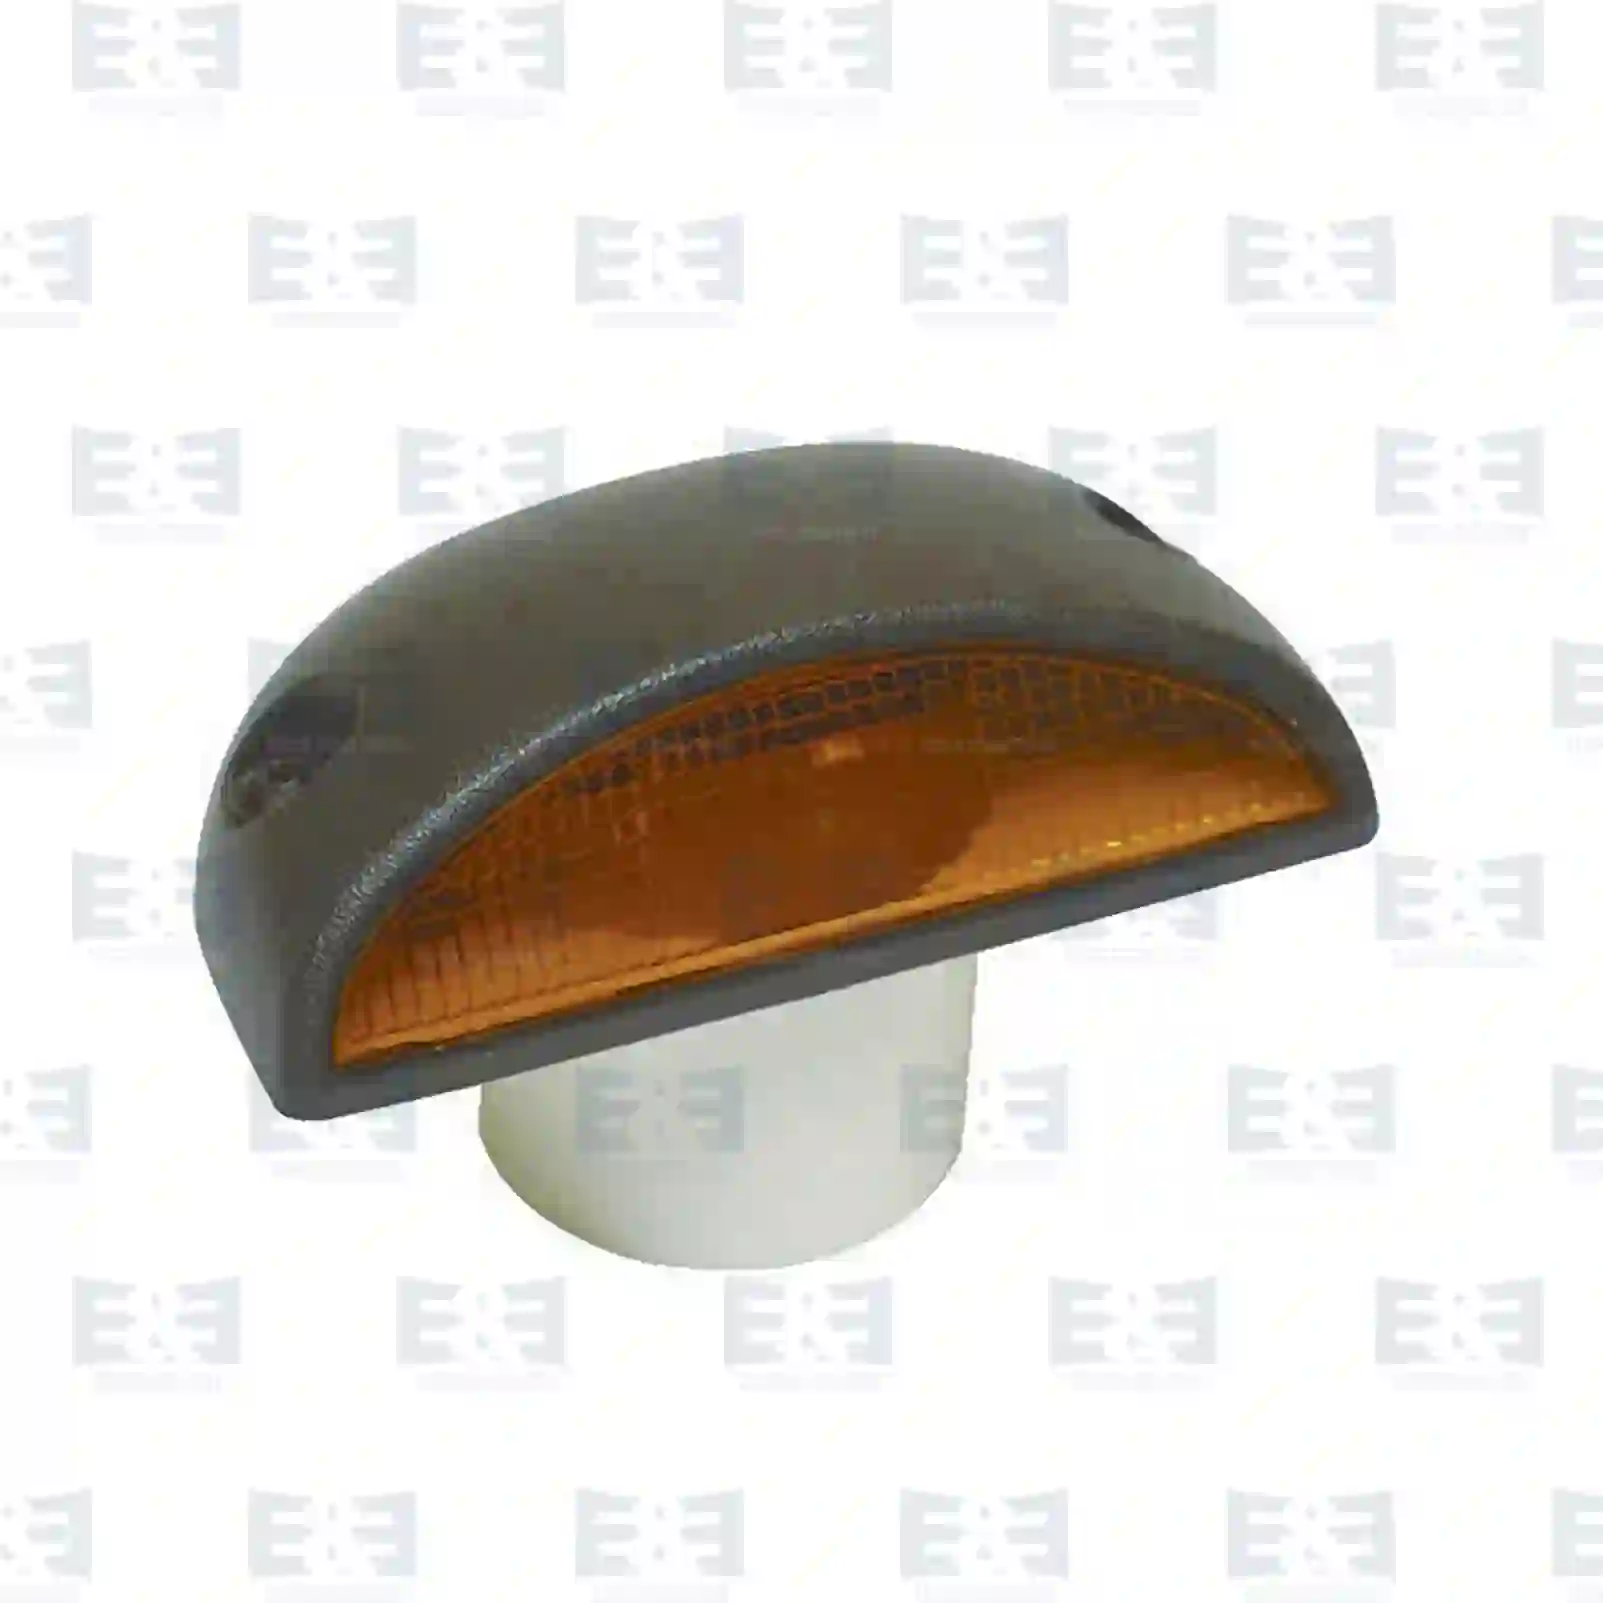 Turn signal lamp, without lamp socket, lateral, 2E2299062, 7421103284, 21103284, 21341202 ||  2E2299062 E&E Truck Spare Parts | Truck Spare Parts, Auotomotive Spare Parts Turn signal lamp, without lamp socket, lateral, 2E2299062, 7421103284, 21103284, 21341202 ||  2E2299062 E&E Truck Spare Parts | Truck Spare Parts, Auotomotive Spare Parts